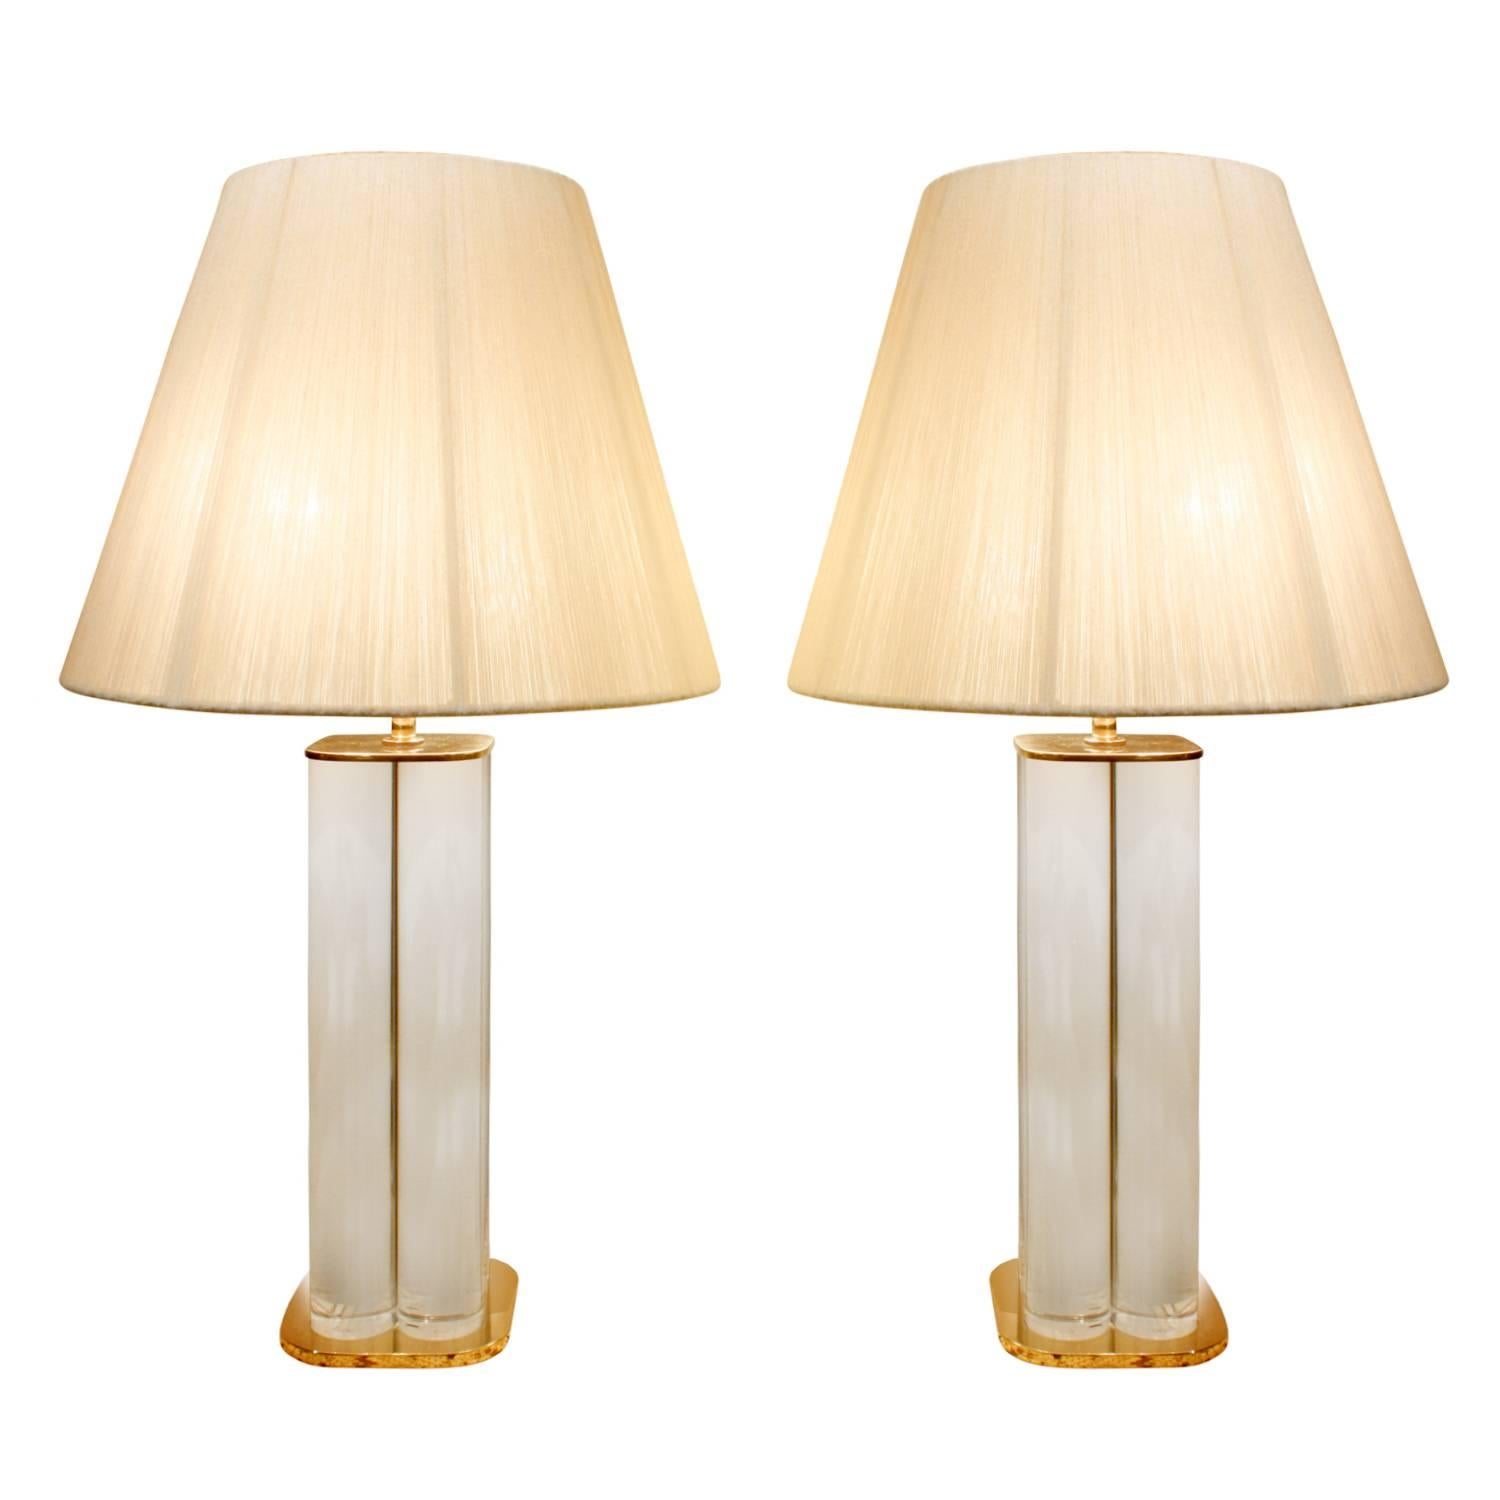 Pair of Chic Table Lamps with Solid Lucite Rods, 1970s